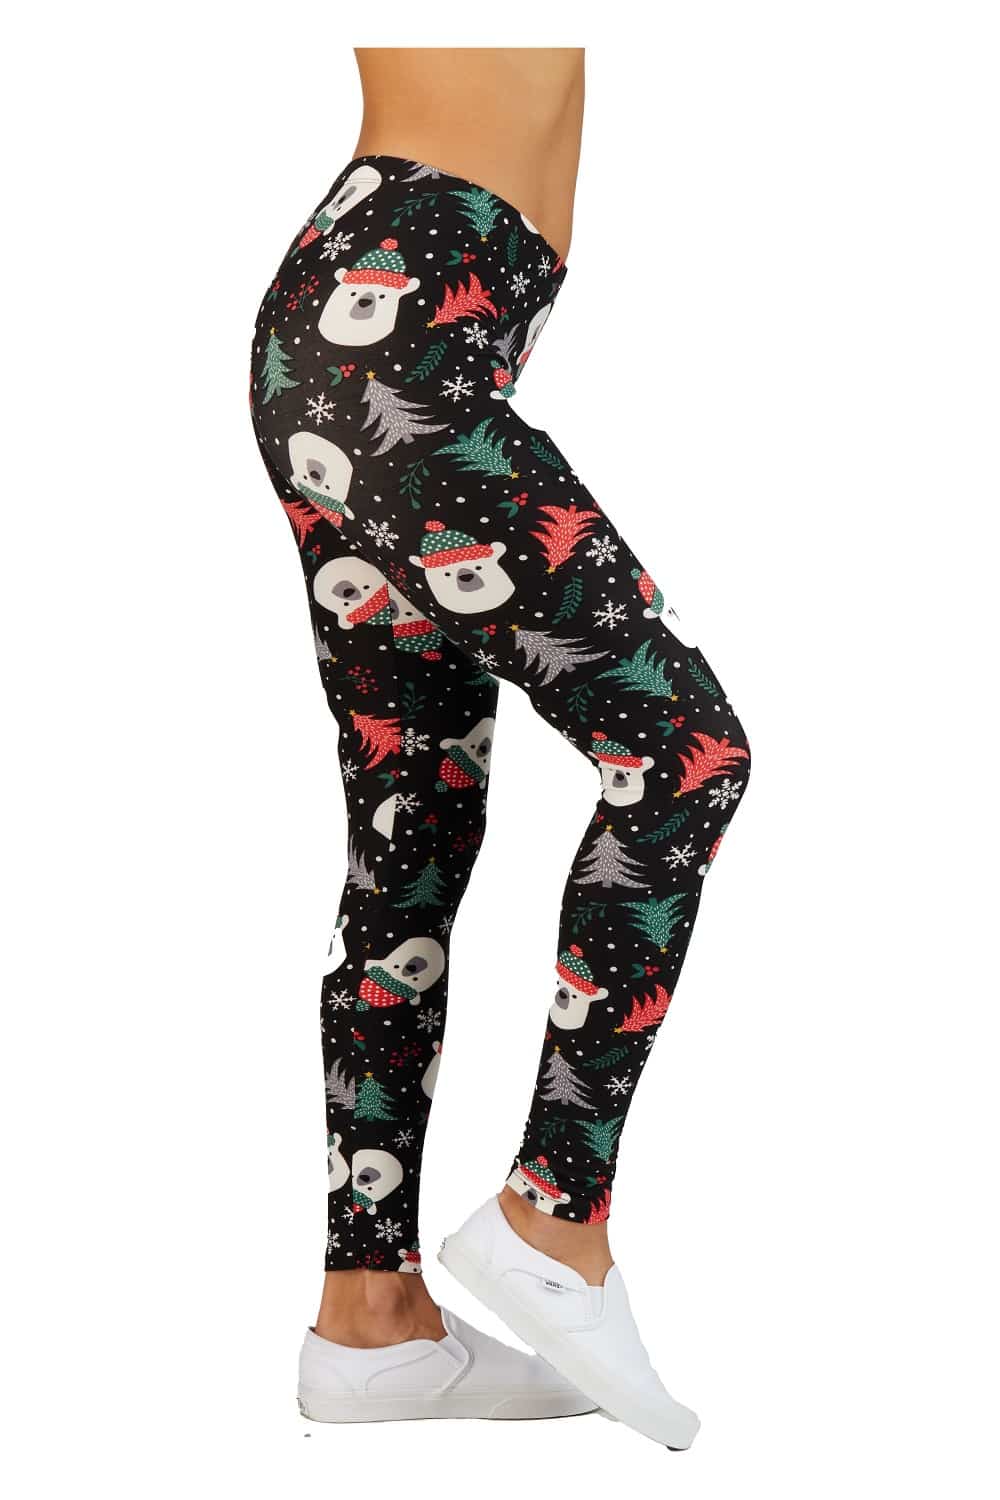 Christmas Print Ankle Leggings 1 inch Elastic Waisted with Christmas ...